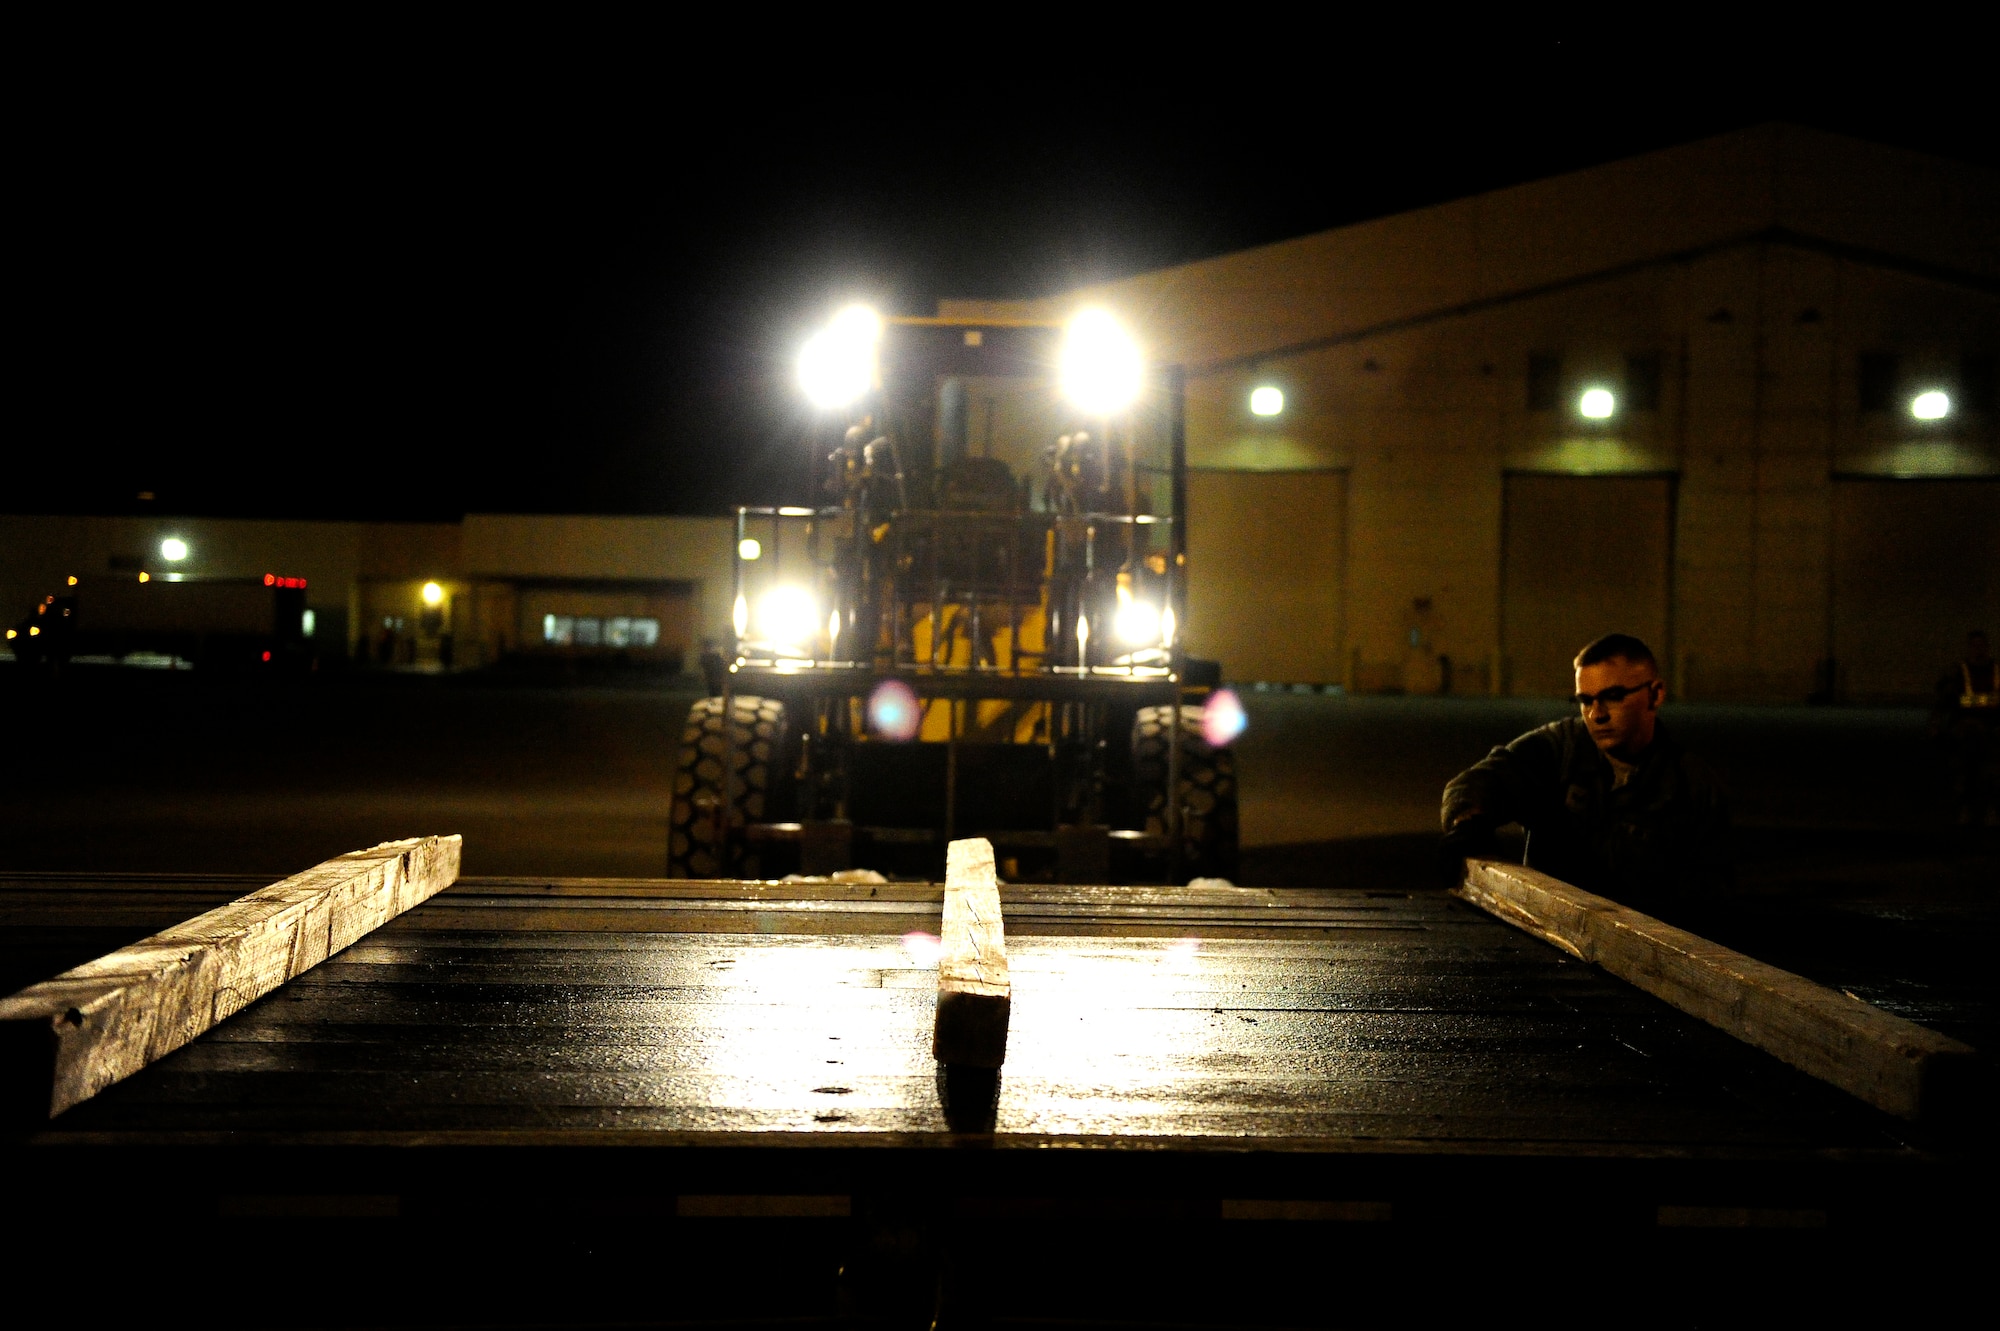 U.S. Air Force Senior Airman William Moreaux, assigned to the 773d Logistics Readiness Squadron, removes support planks from flatbed truck after unloading an equipment pallet during Polar Force 19-4 at Joint Base Elmendorf-Richardson, Alaska, March 26, 2019. Polar Force is a two-week exercise designed to test JBER’s mission readiness. Exercises like this strengthen and develop the skills service members require when facing adverse situations.